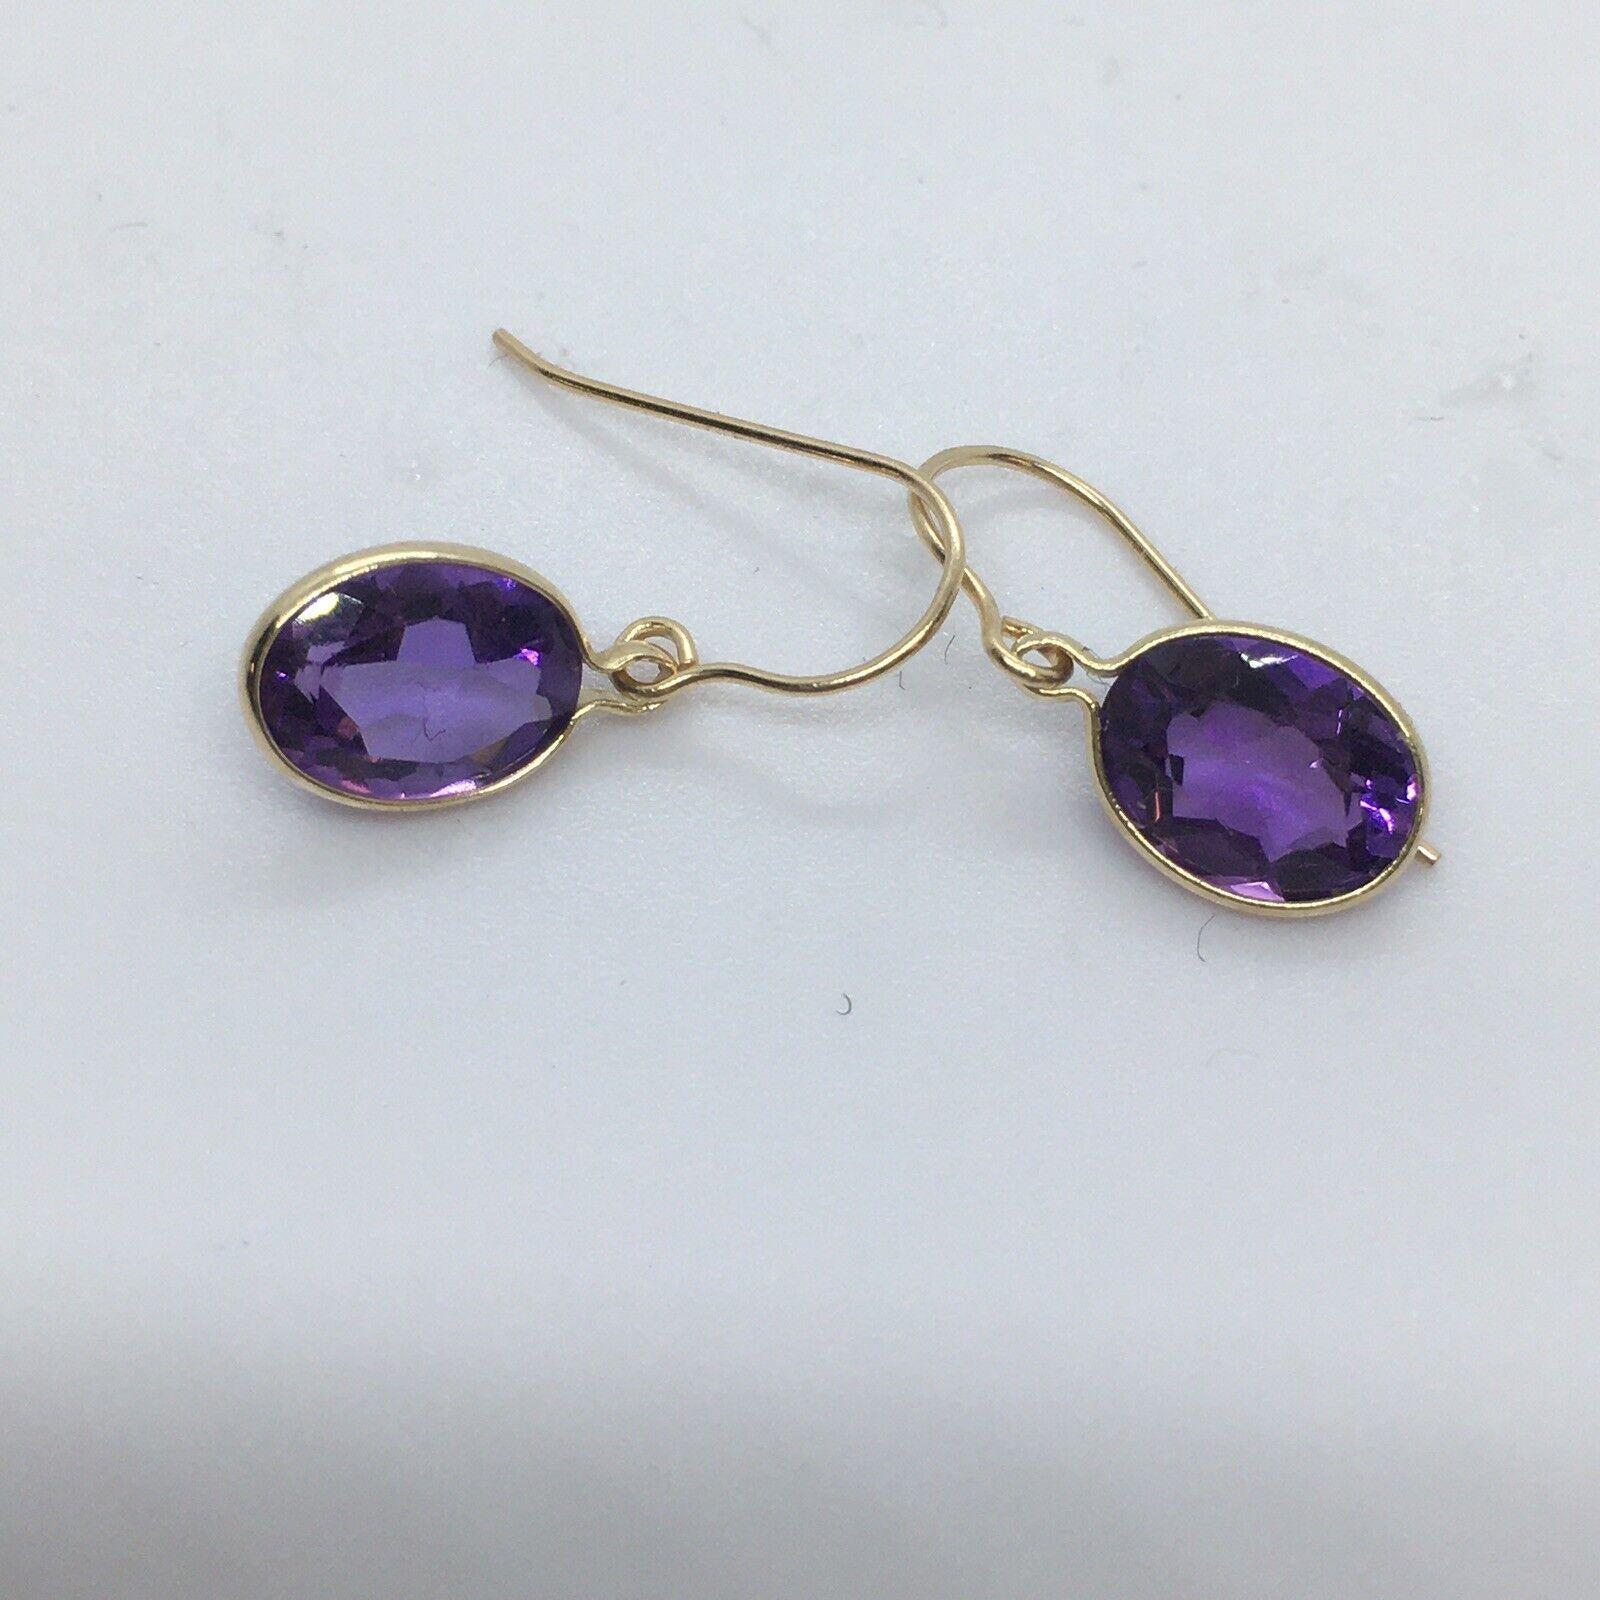 14K Solid Yellow Gold 8mm by 6mm Oval Cut Amethyst Dangling Wire Earrings

hanging bit less than 3/4 inch
Weighting 0.8 gram